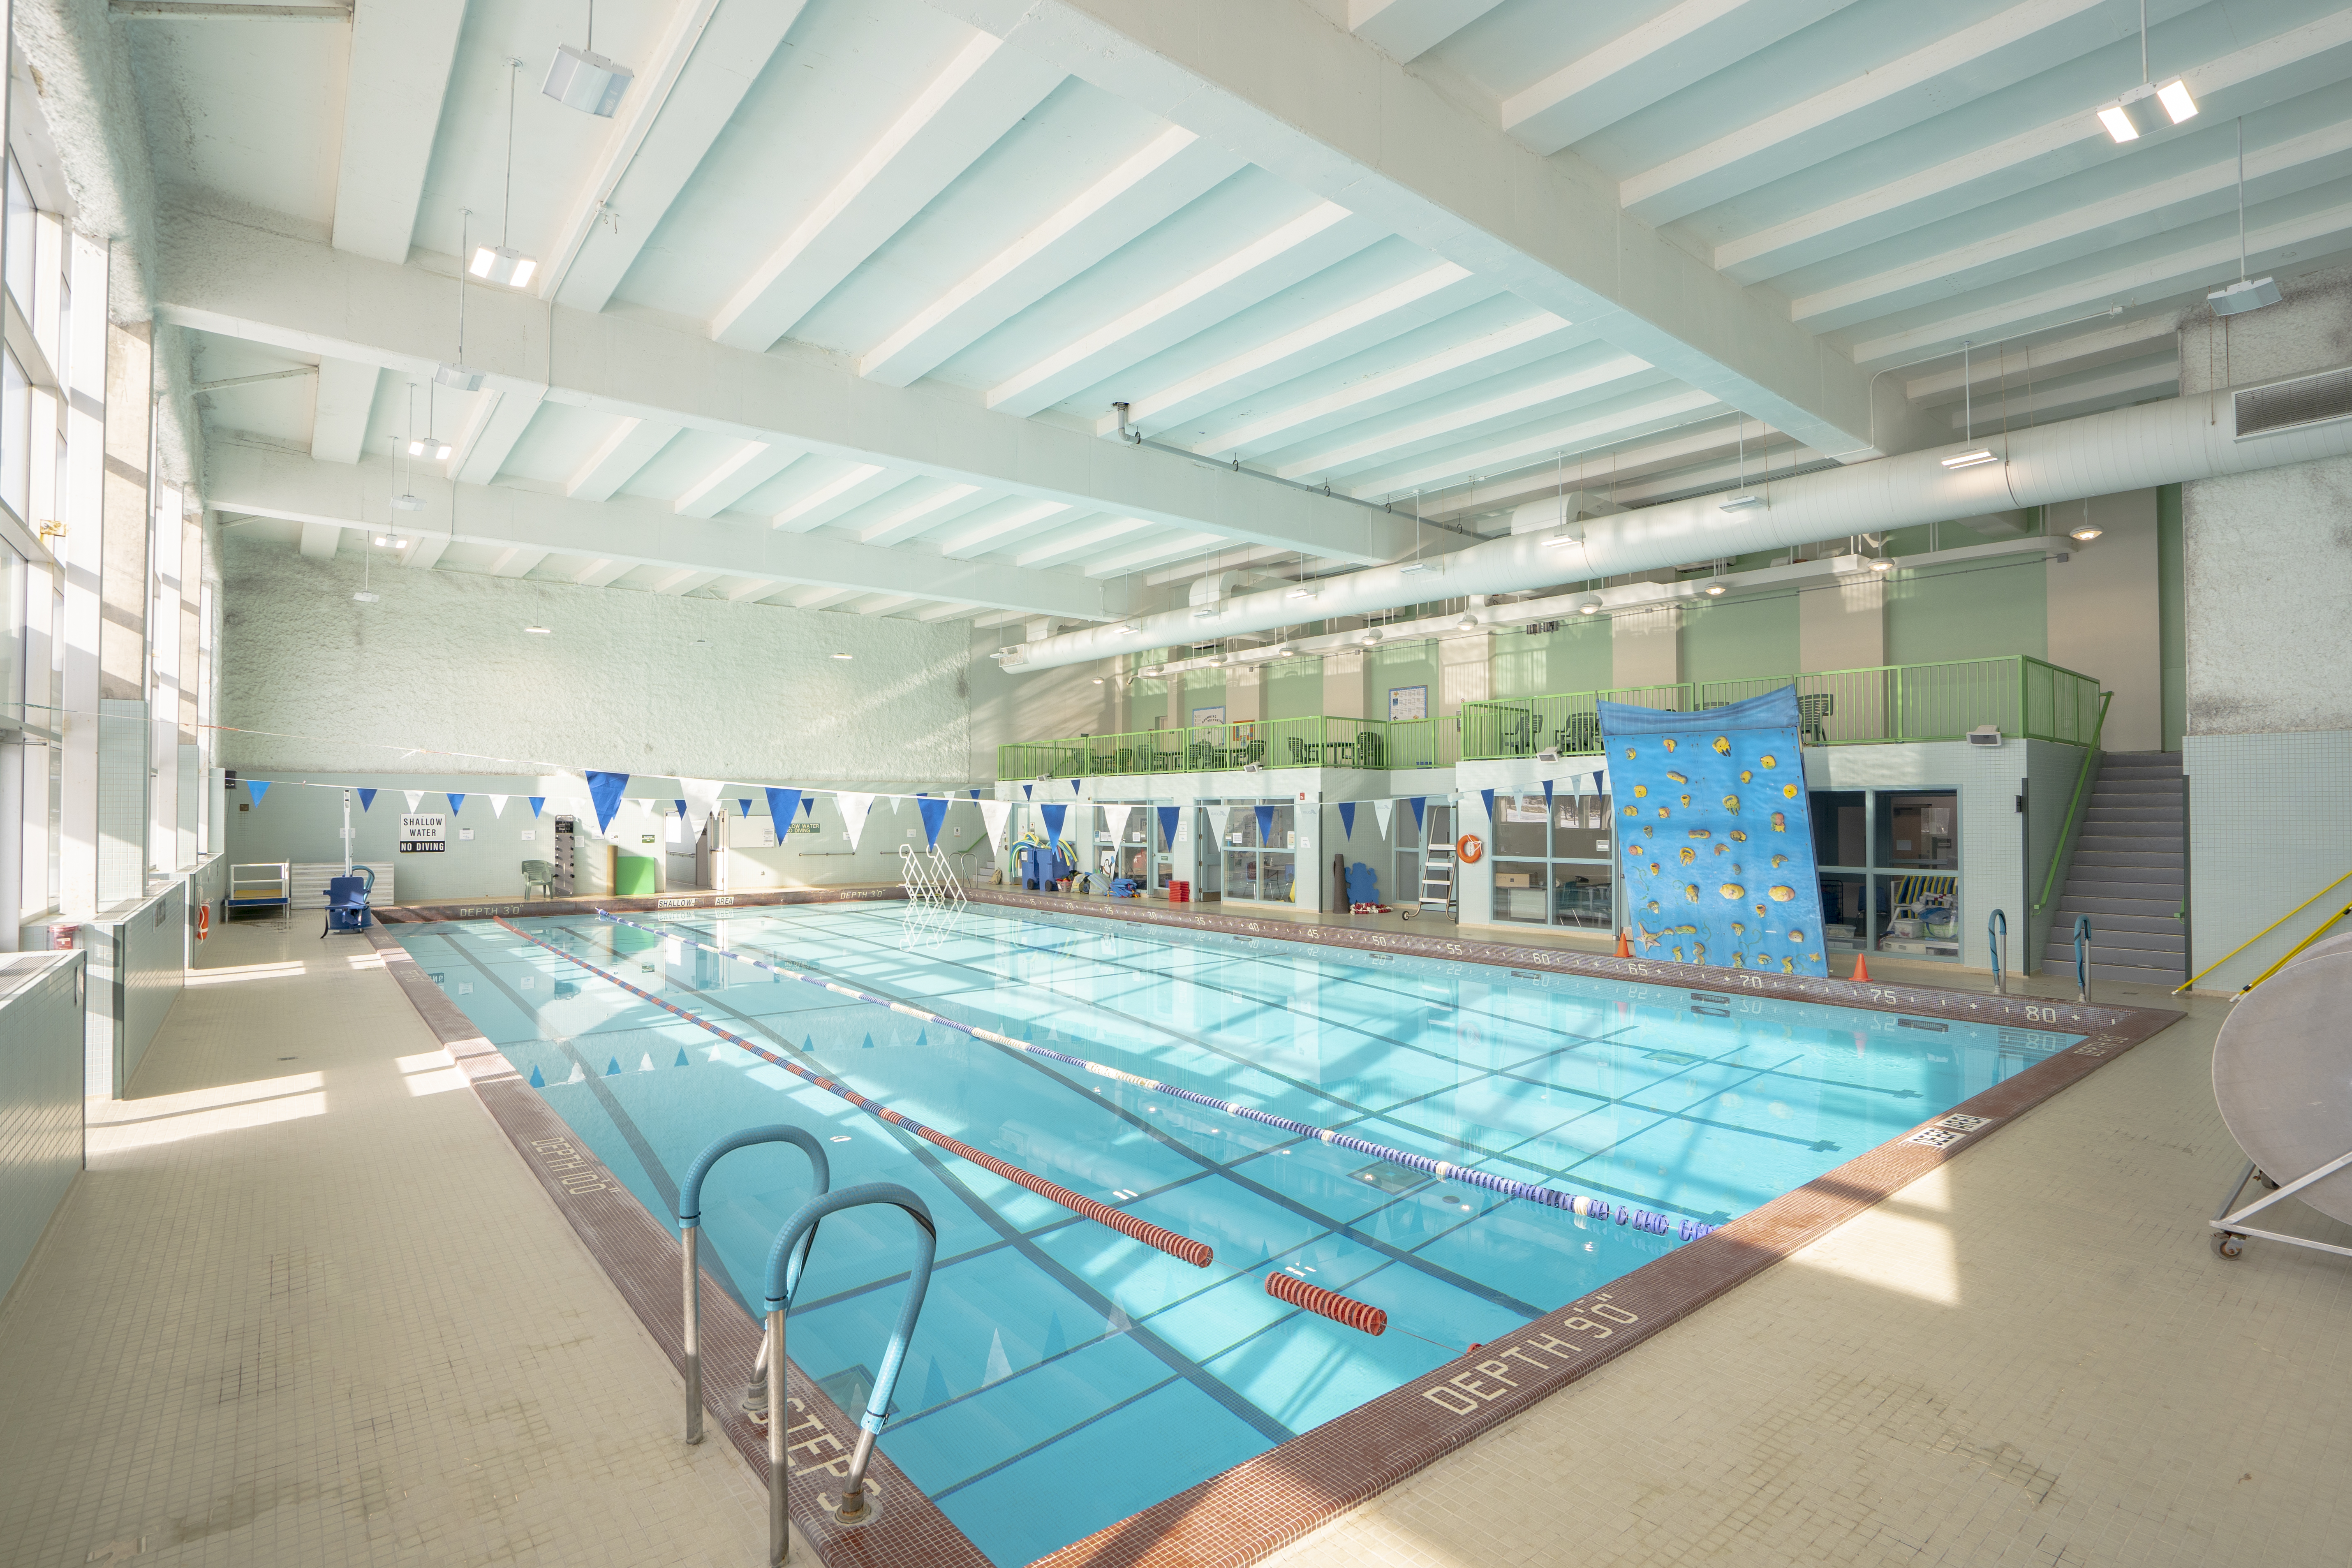 Carling Heights Optimist Community Centre Indoor Pool